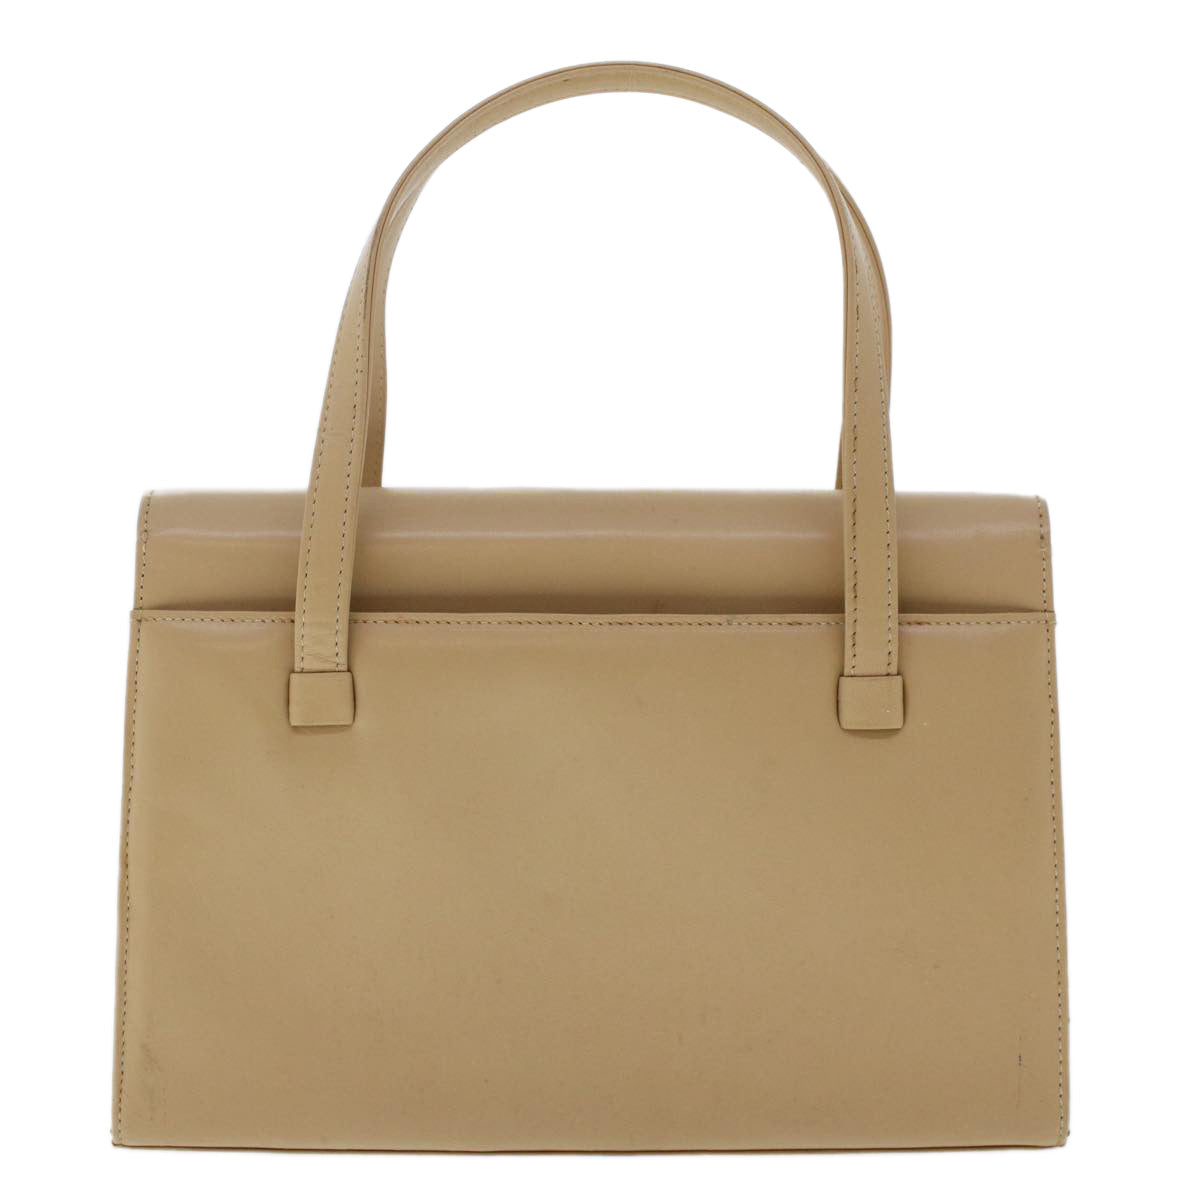 GIVENCHY Hand Bag Leather Beige Auth 48184 - 0